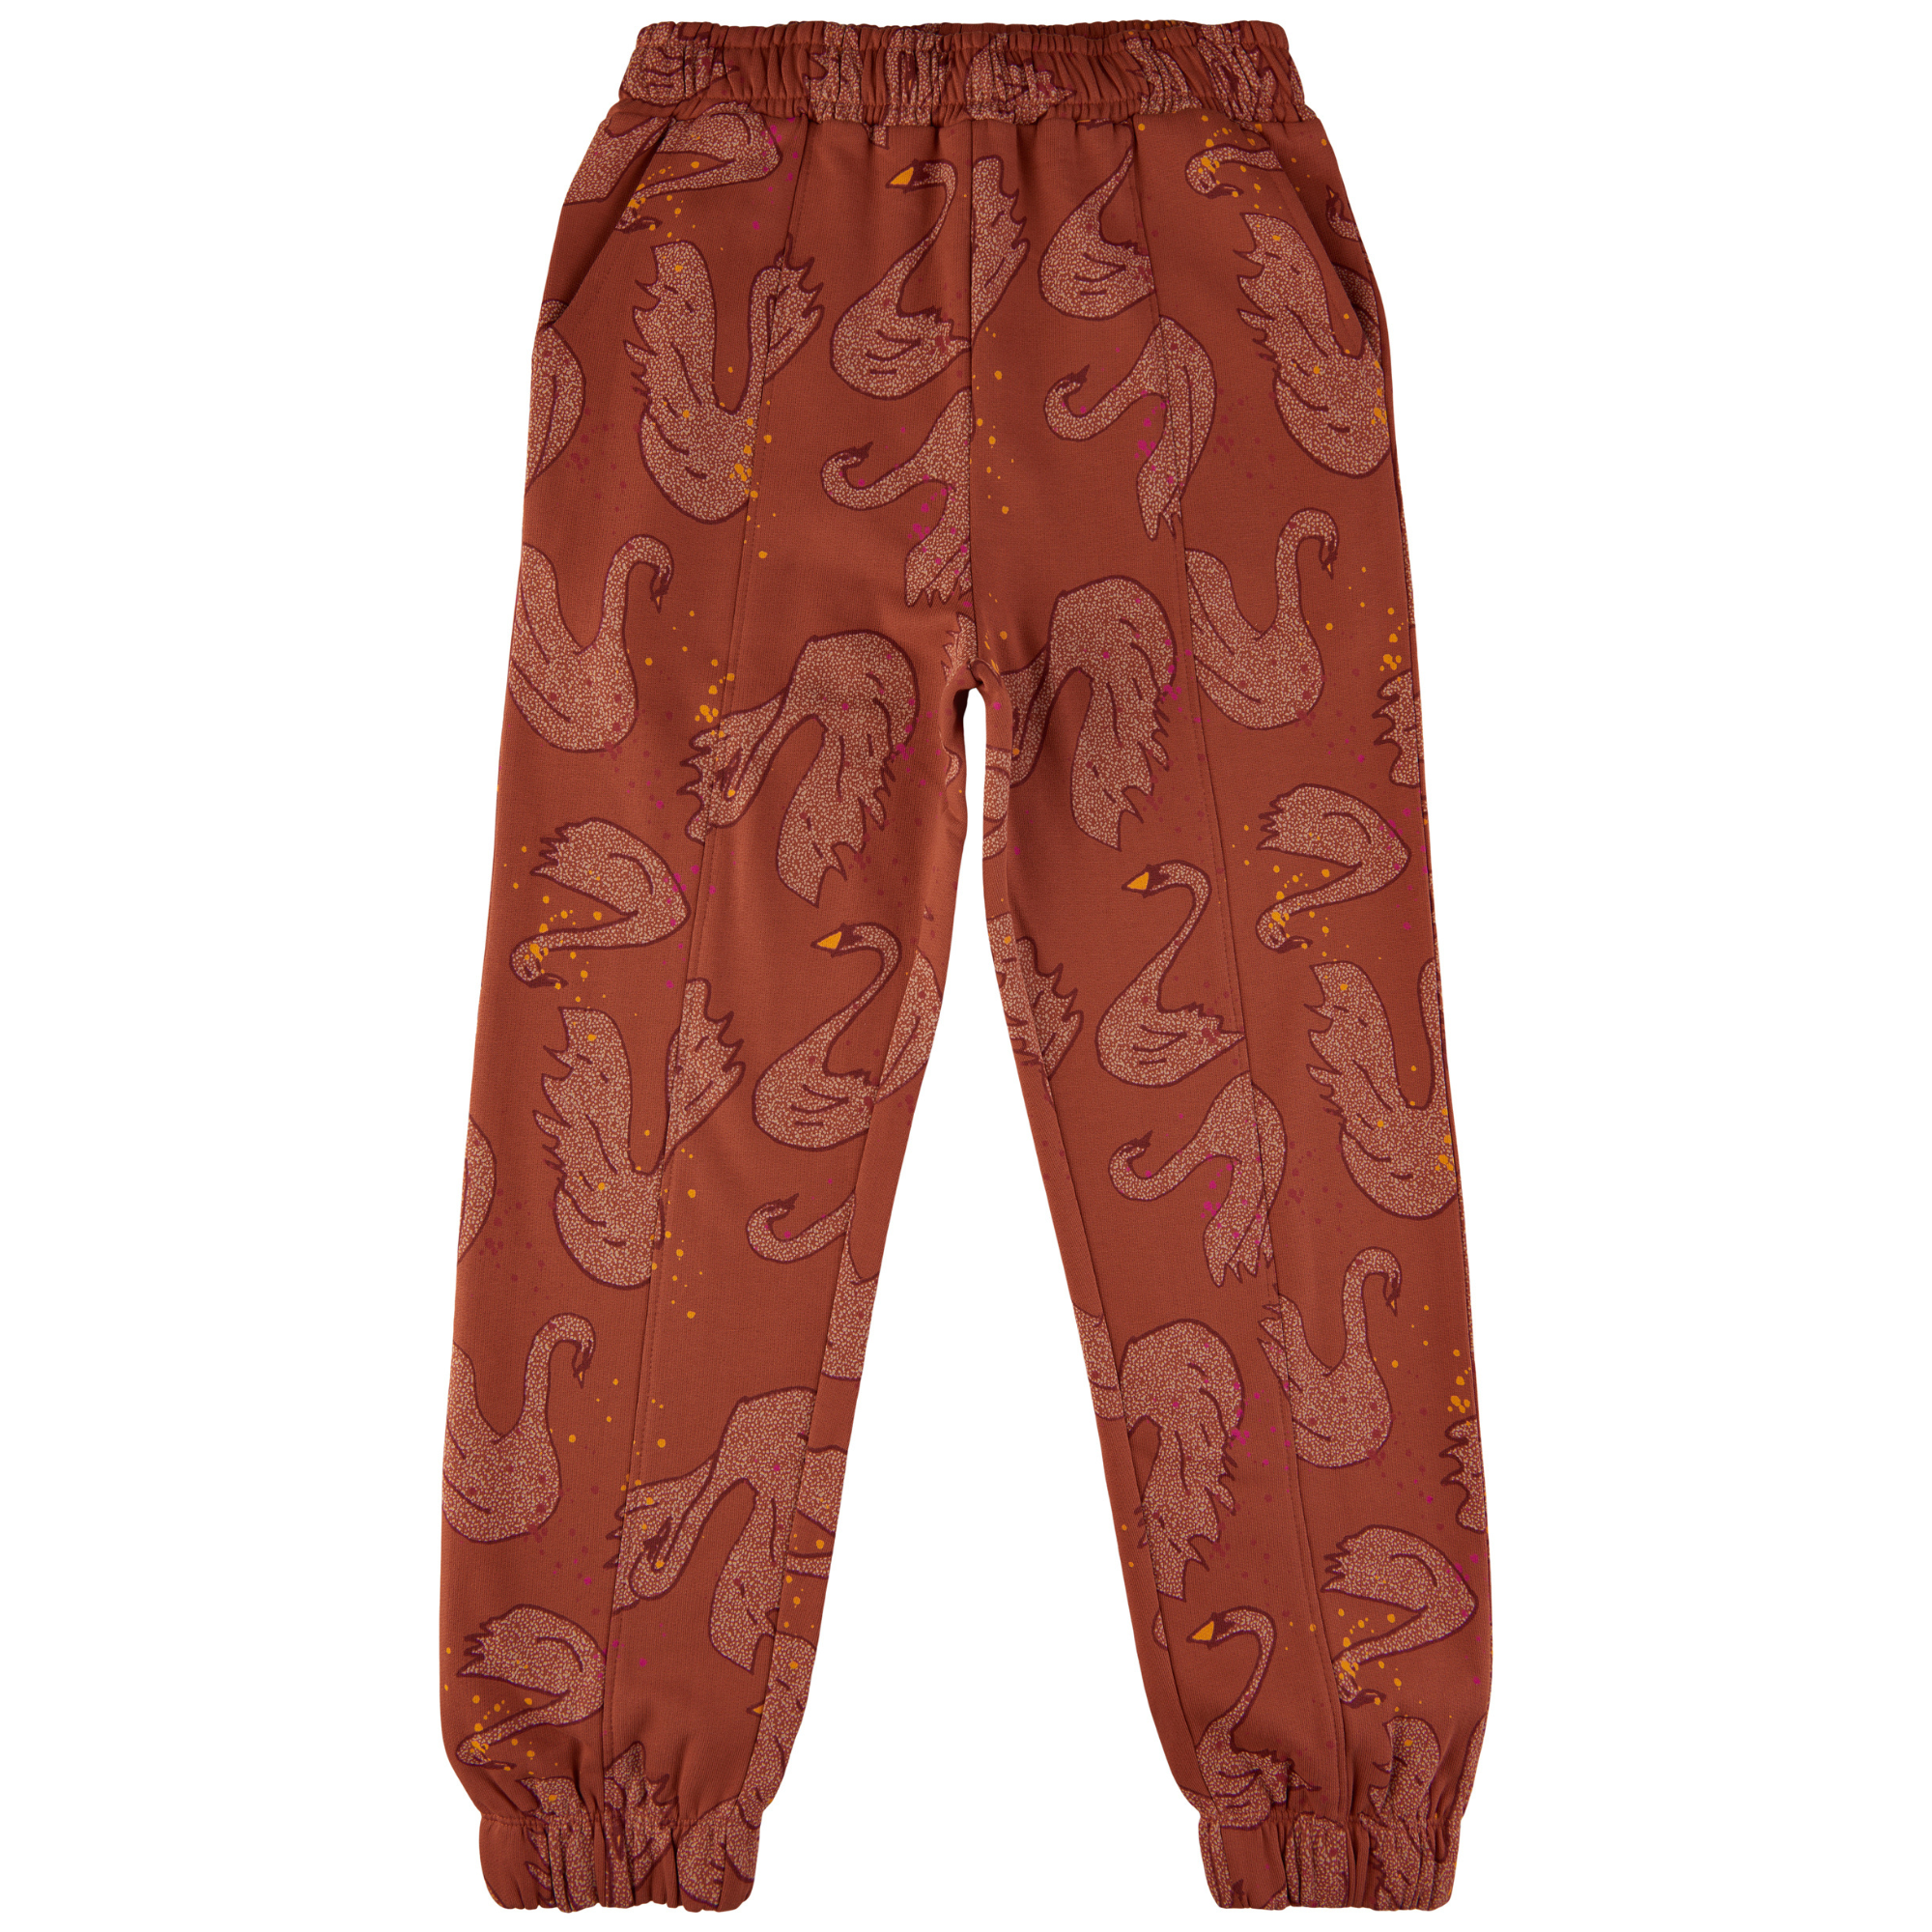 Soft Gallery - Jagger Swan Sweatpants, SG2300 - Baked Clay